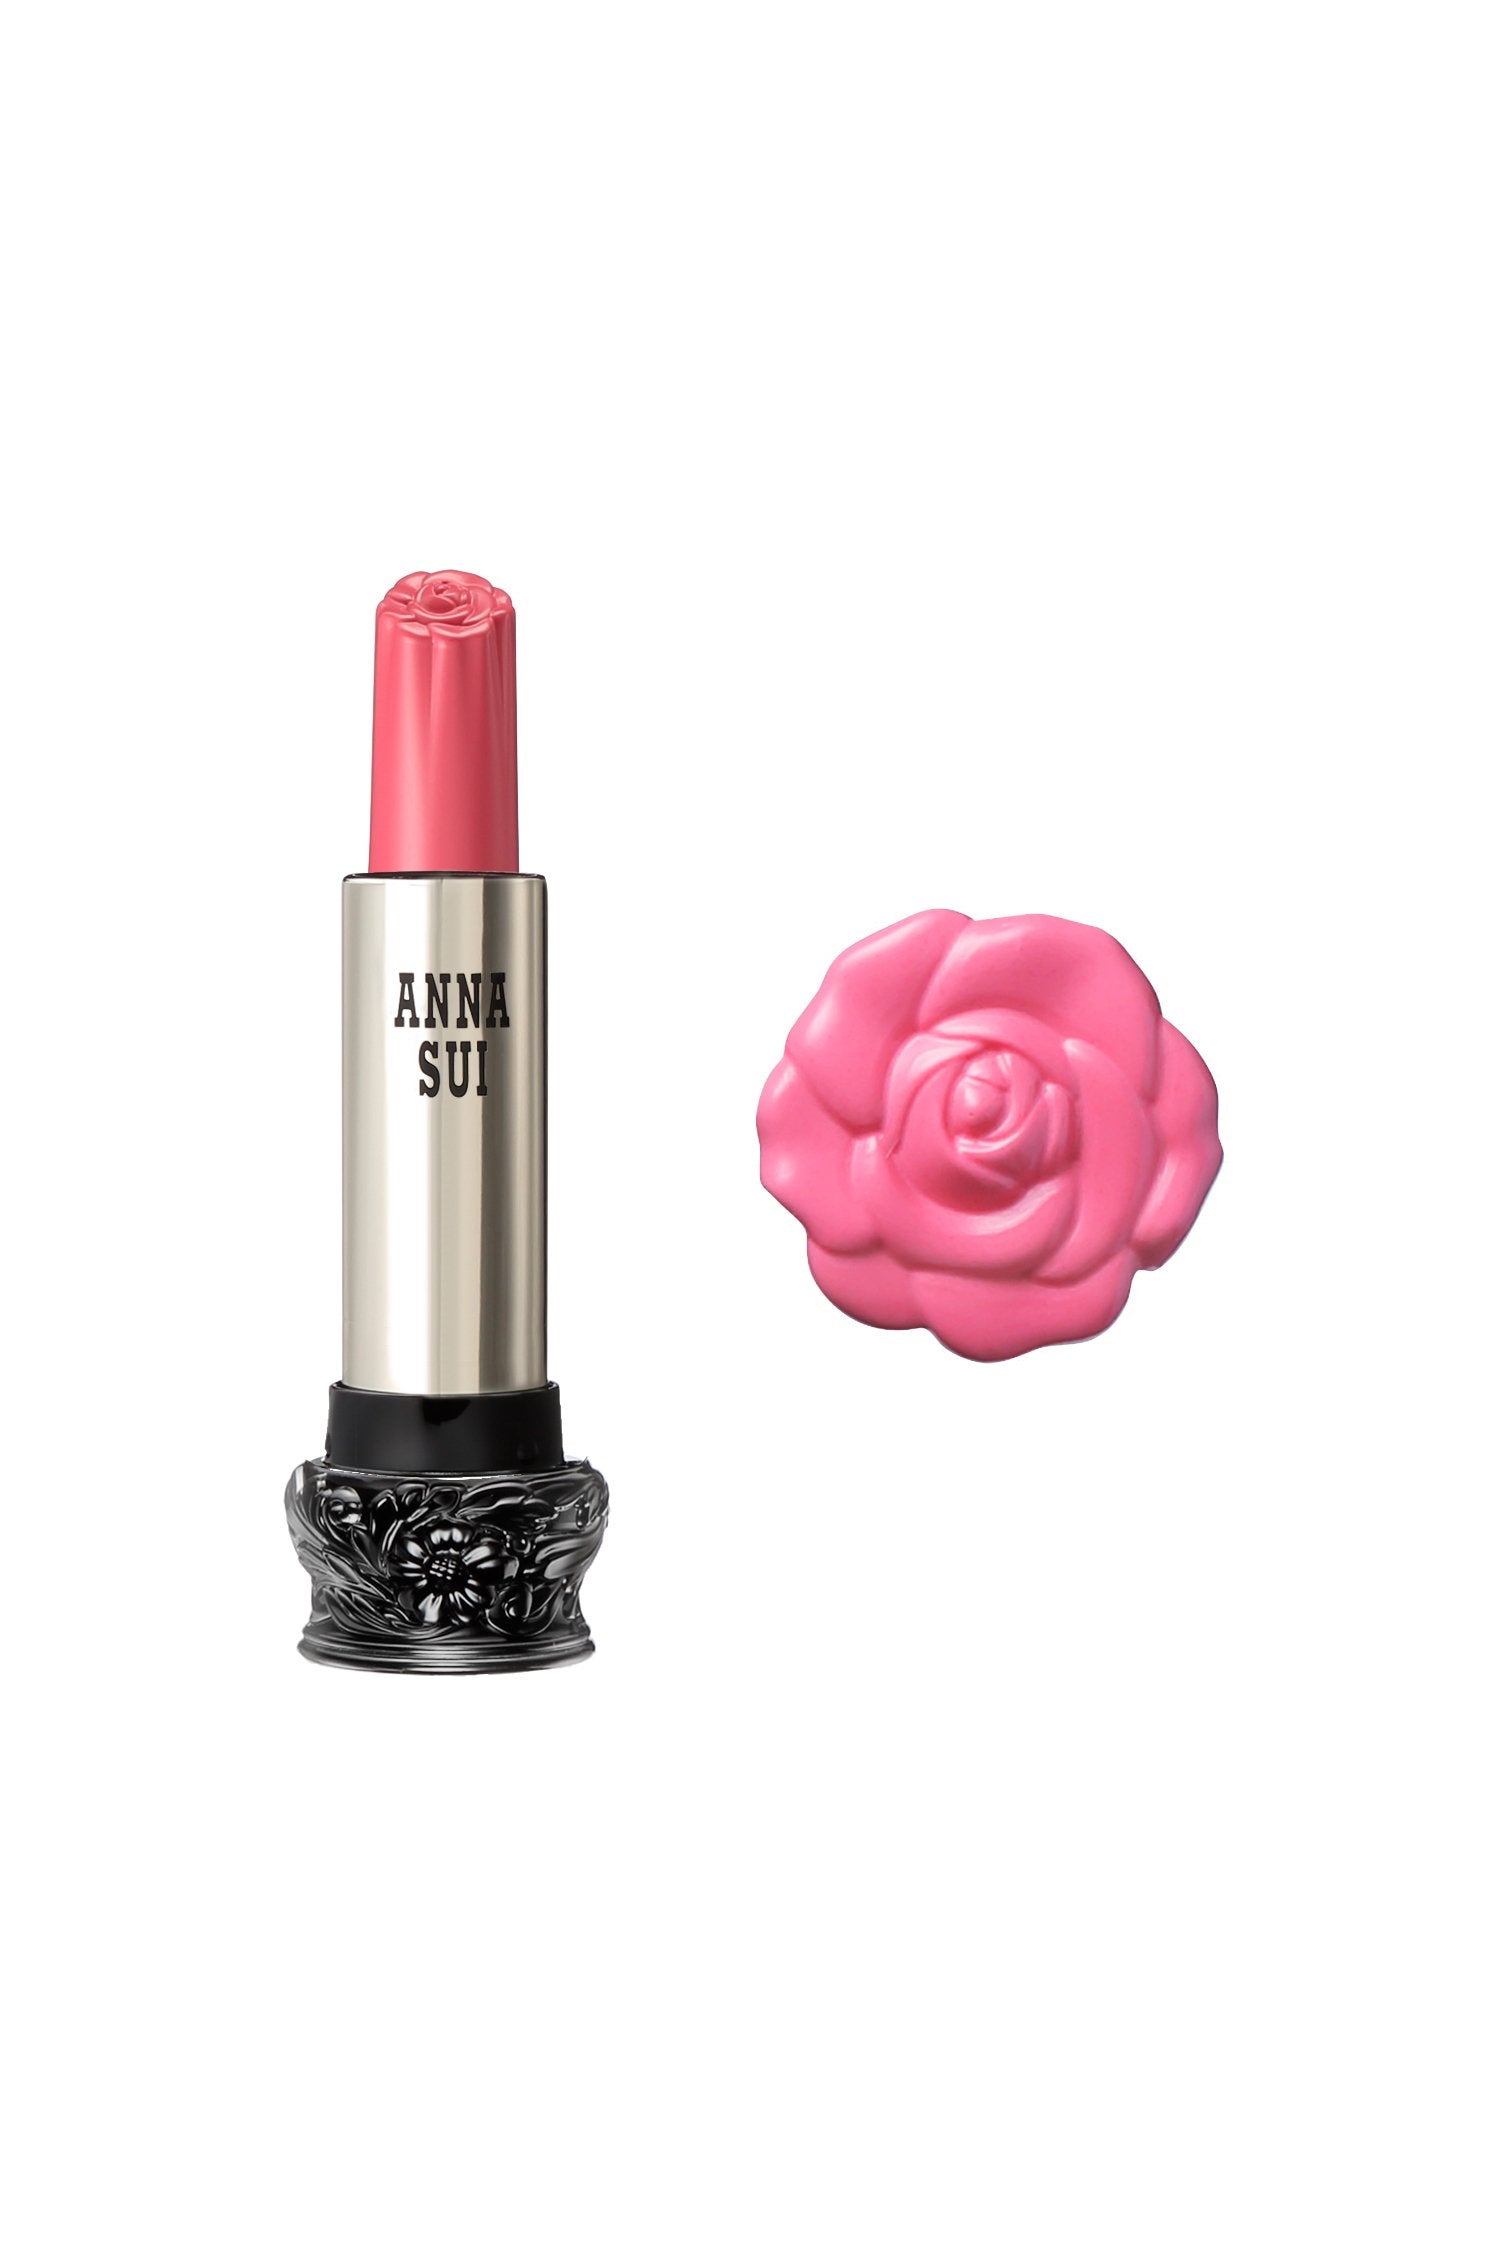 300 - Pale Pink Peony Lipstick F: Fairy Flower, in a cylindrical container, large black base, engraved floral design, metallic body